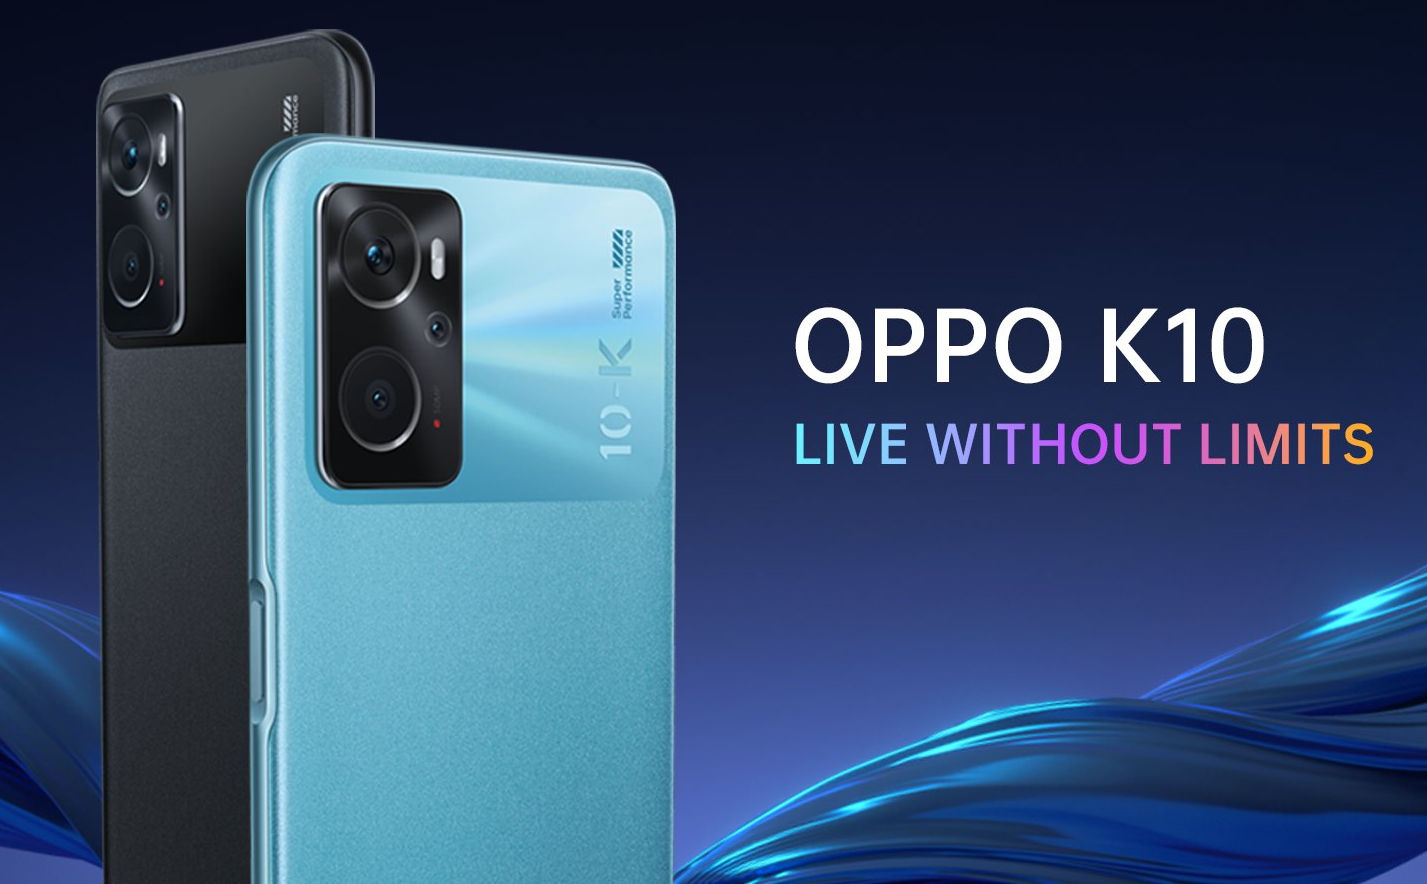 OPPO K10 and OPPO Enco Air2 earbuds launching in India on March 23